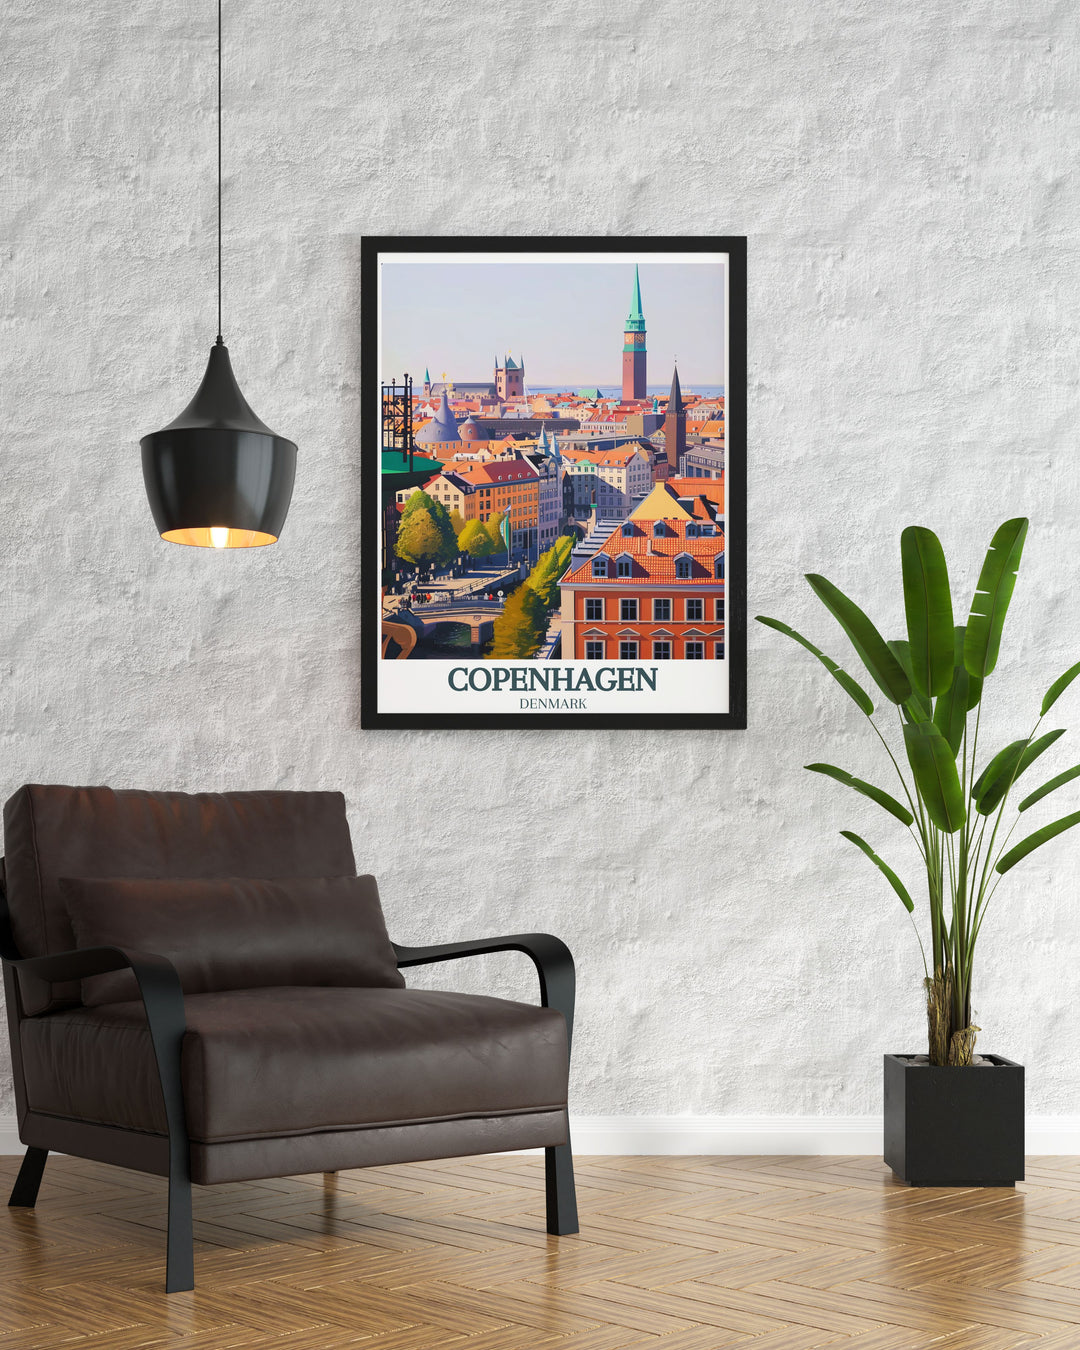 Add a touch of sophistication to your home with this stunning Copenhagen wall art of The Round Tower view, Copenhagen city hall. The detailed print brings the iconic skyline of Denmarks capital into your space.